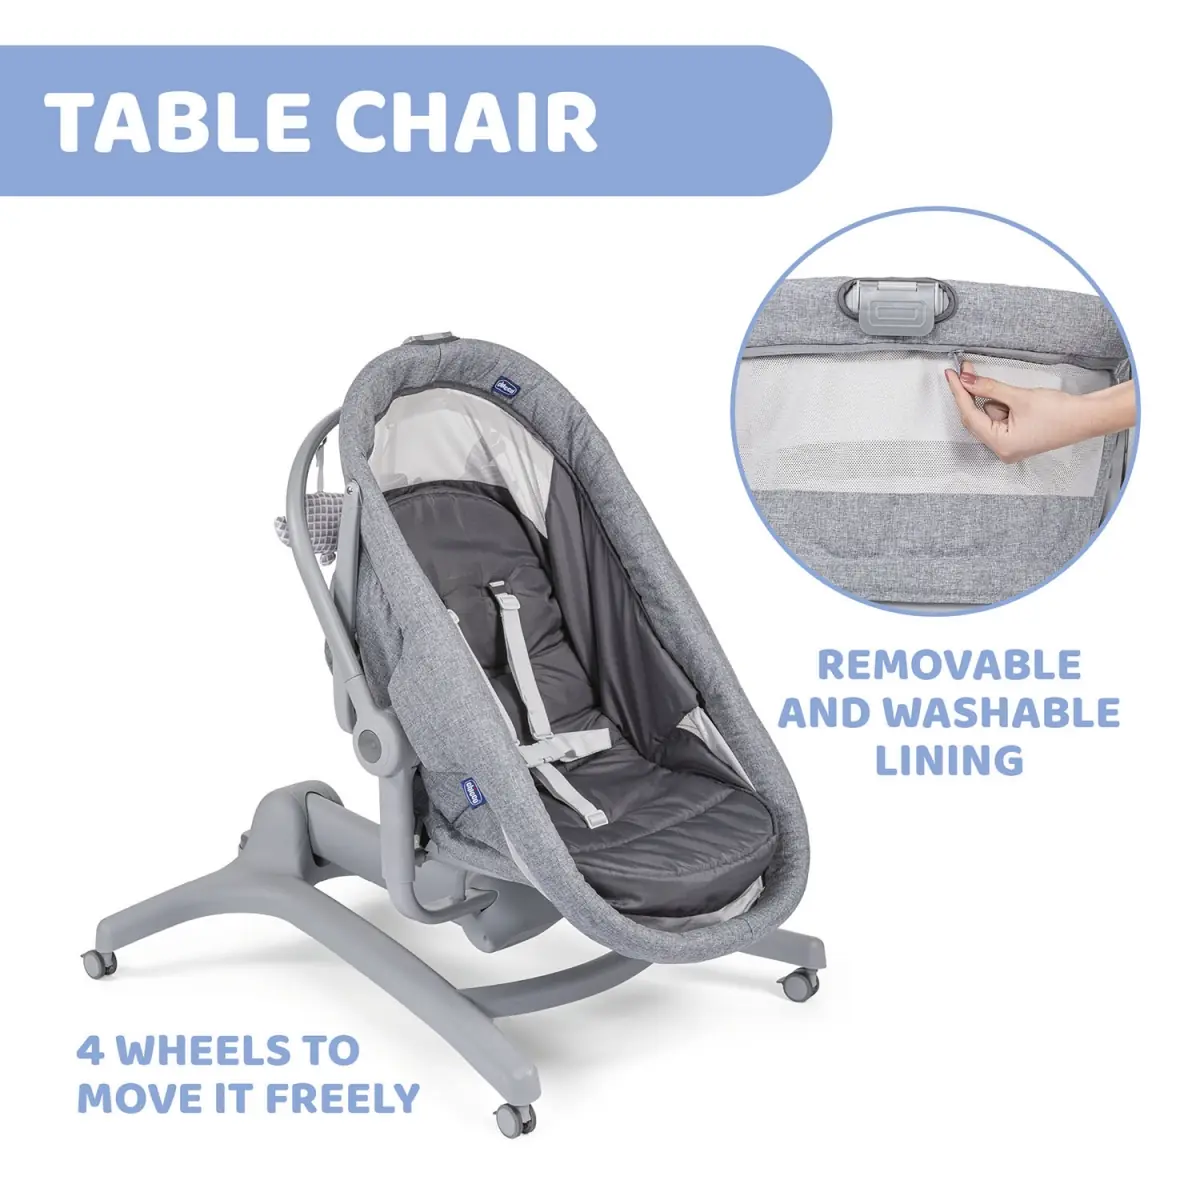 Discover Baby Hug 4in1 Air - Chicco 